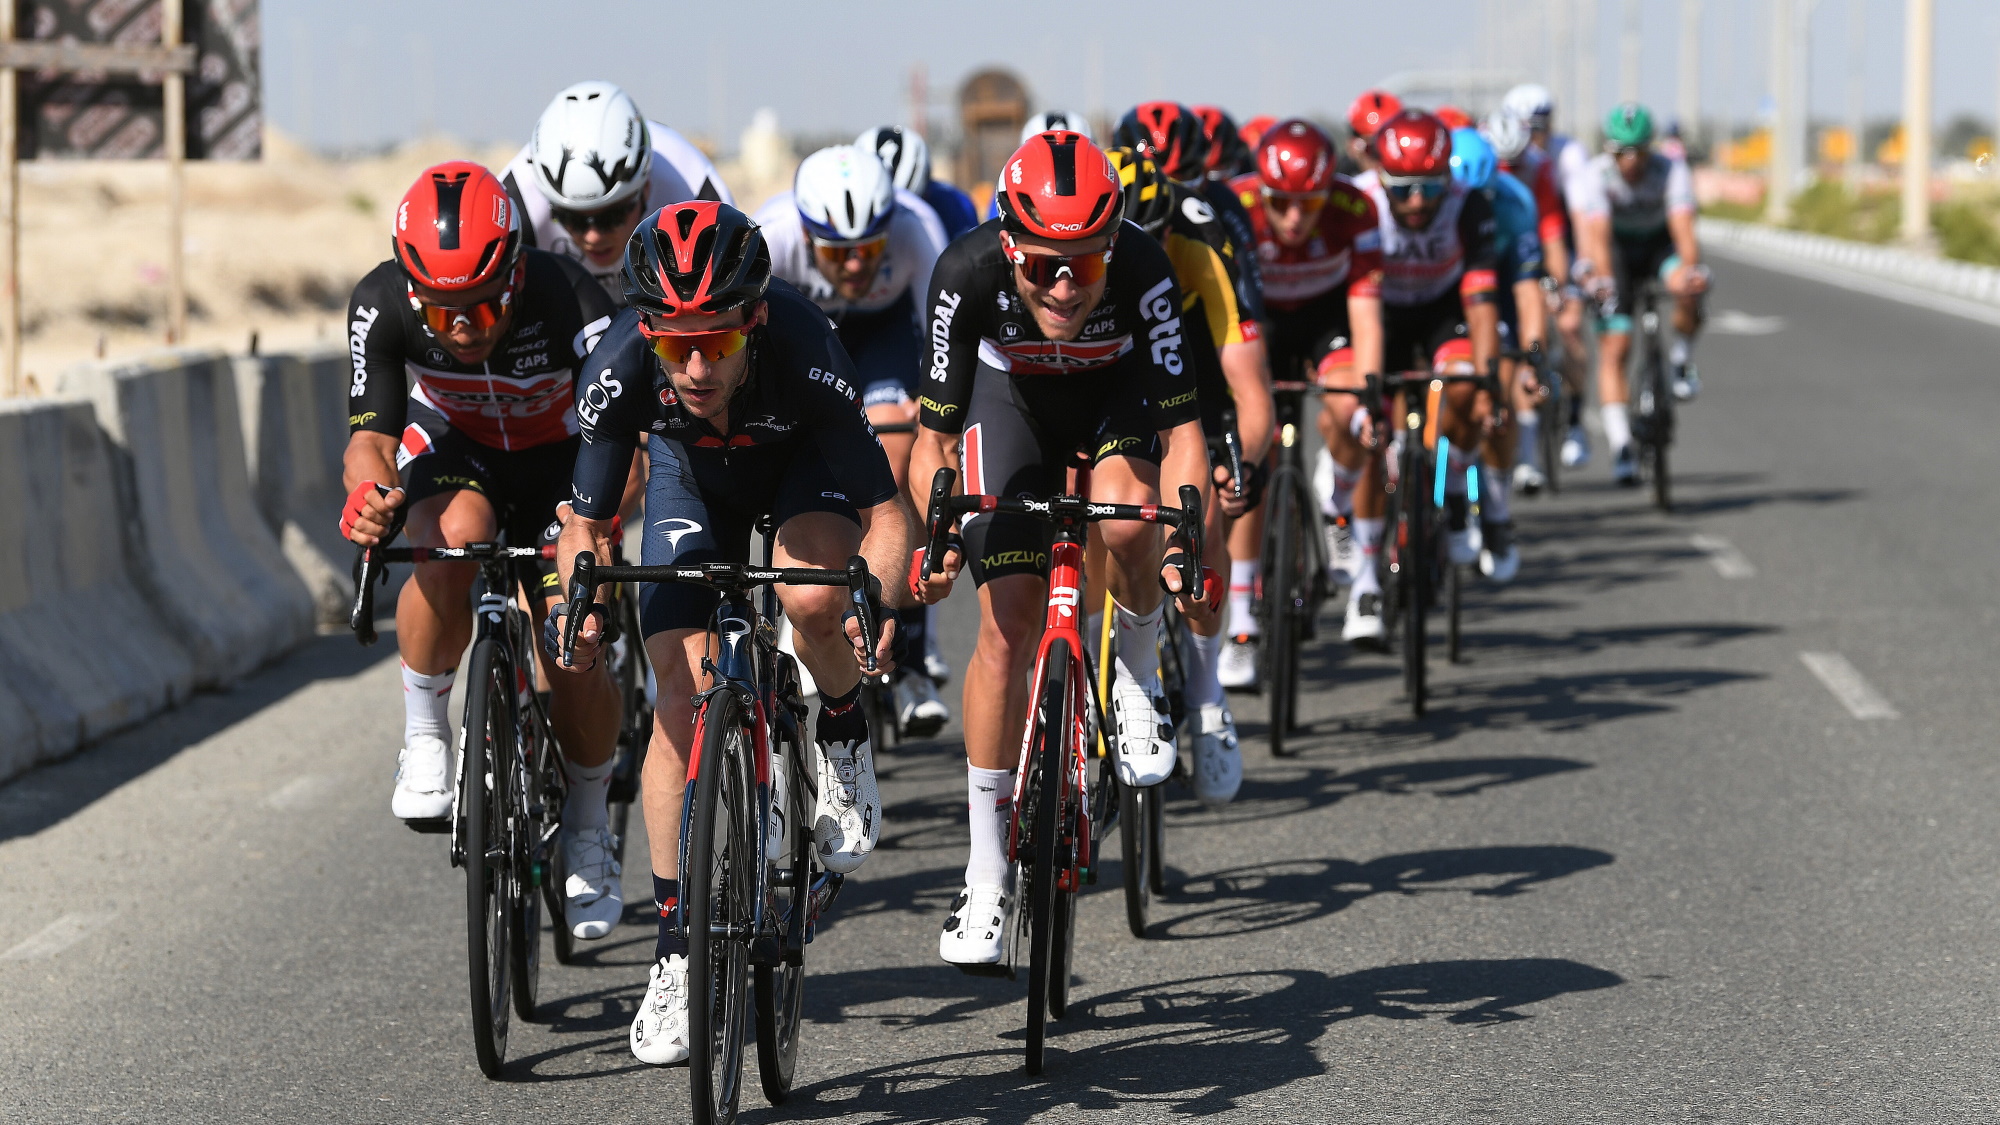 UAE Tour live stream 2022 how to watch UCI World Tour cycling online from anywhere TechRadar